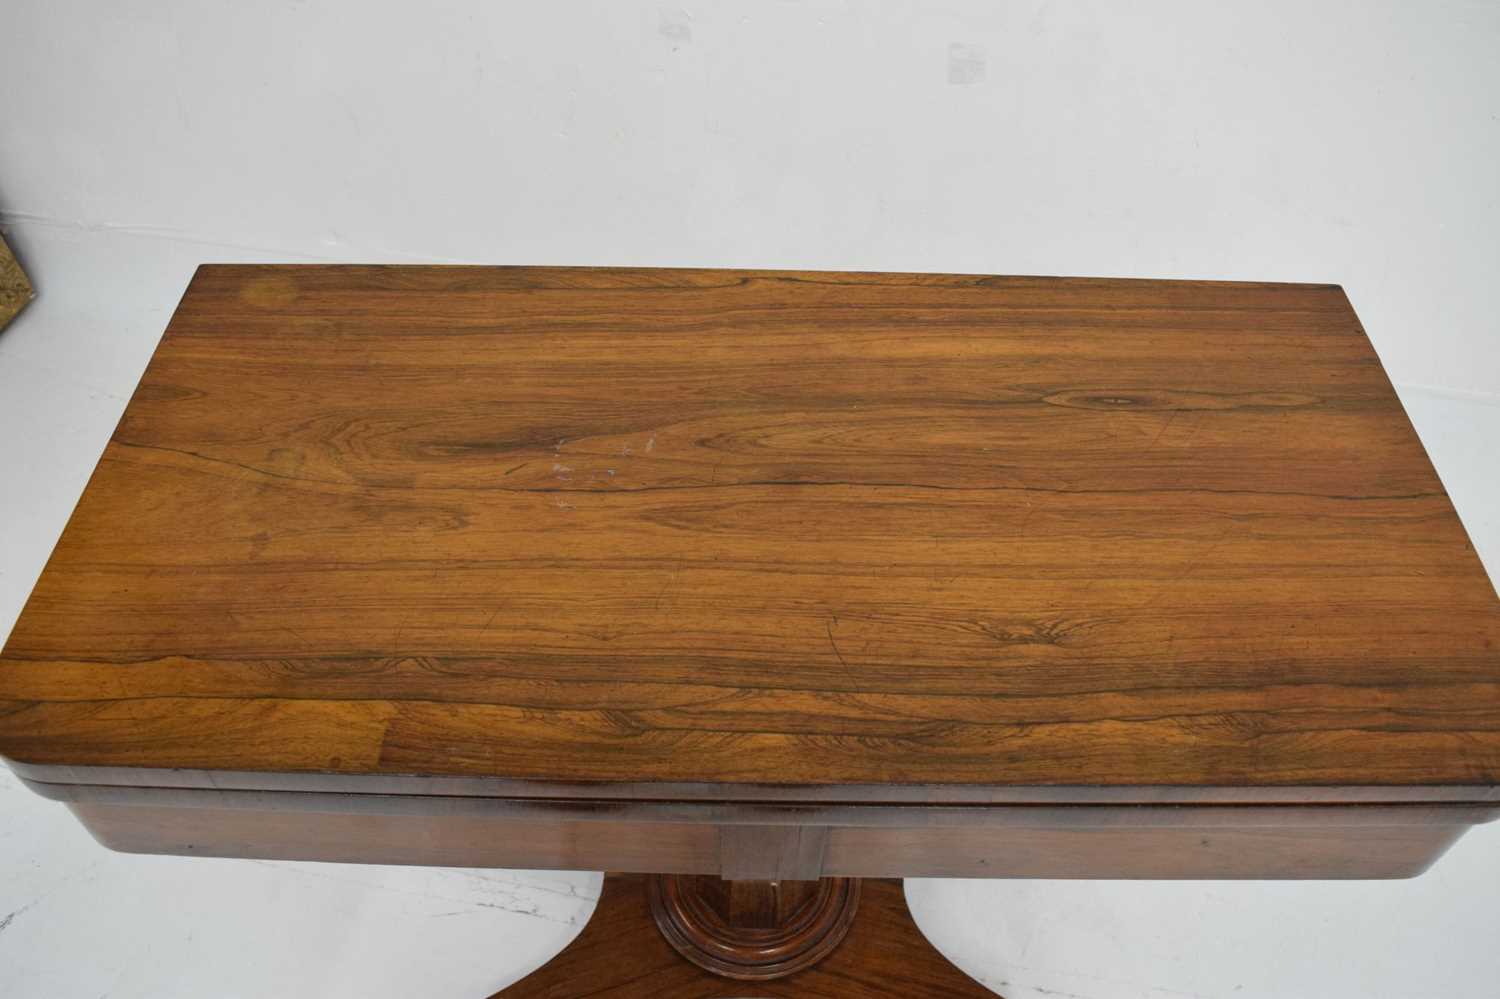 Second quarter 19th century rosewood fold-over pedestal card table - Image 8 of 10